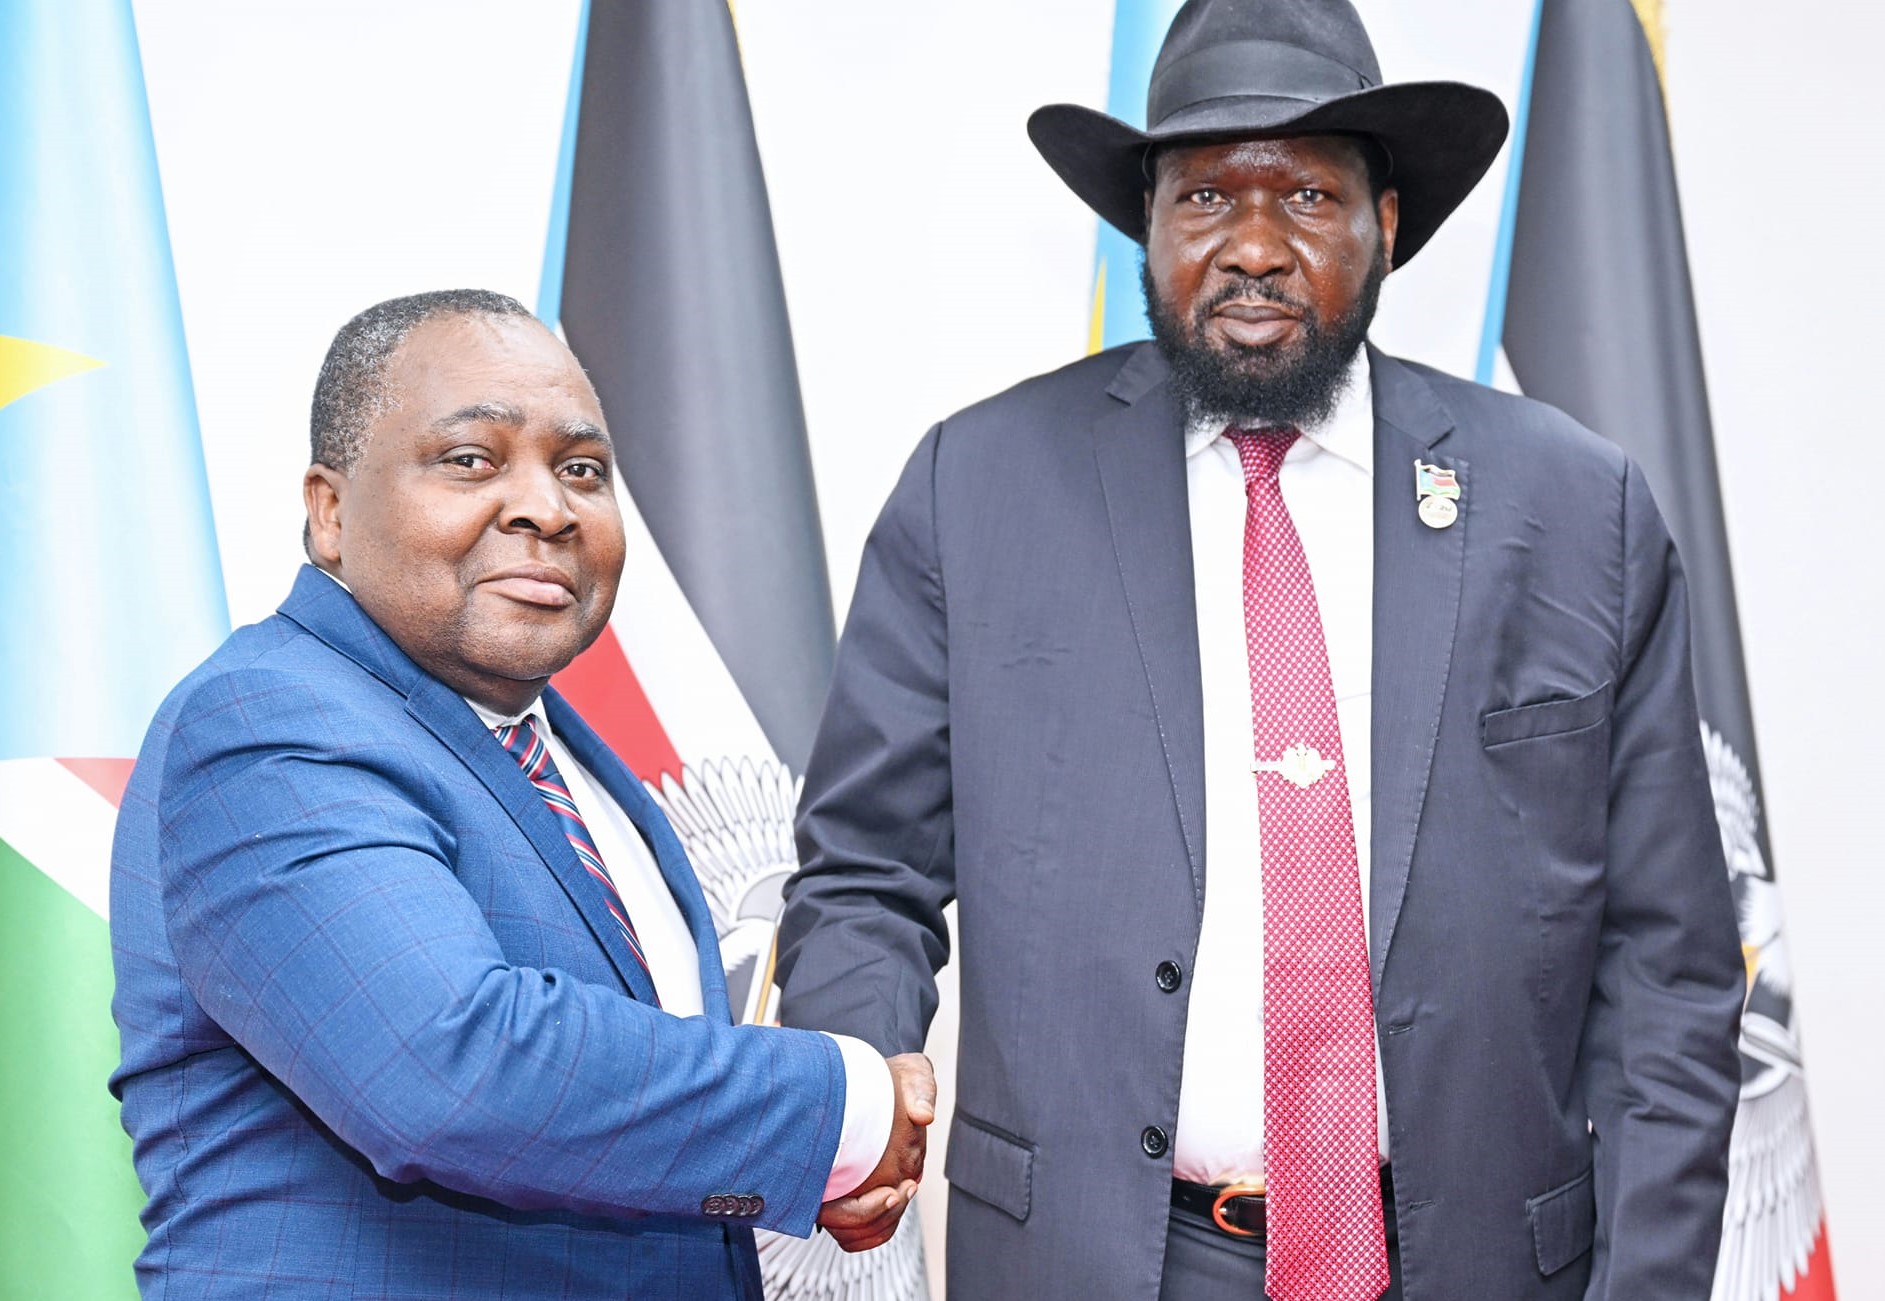 UN Security Council’s sanctions committee meets with President Kiir